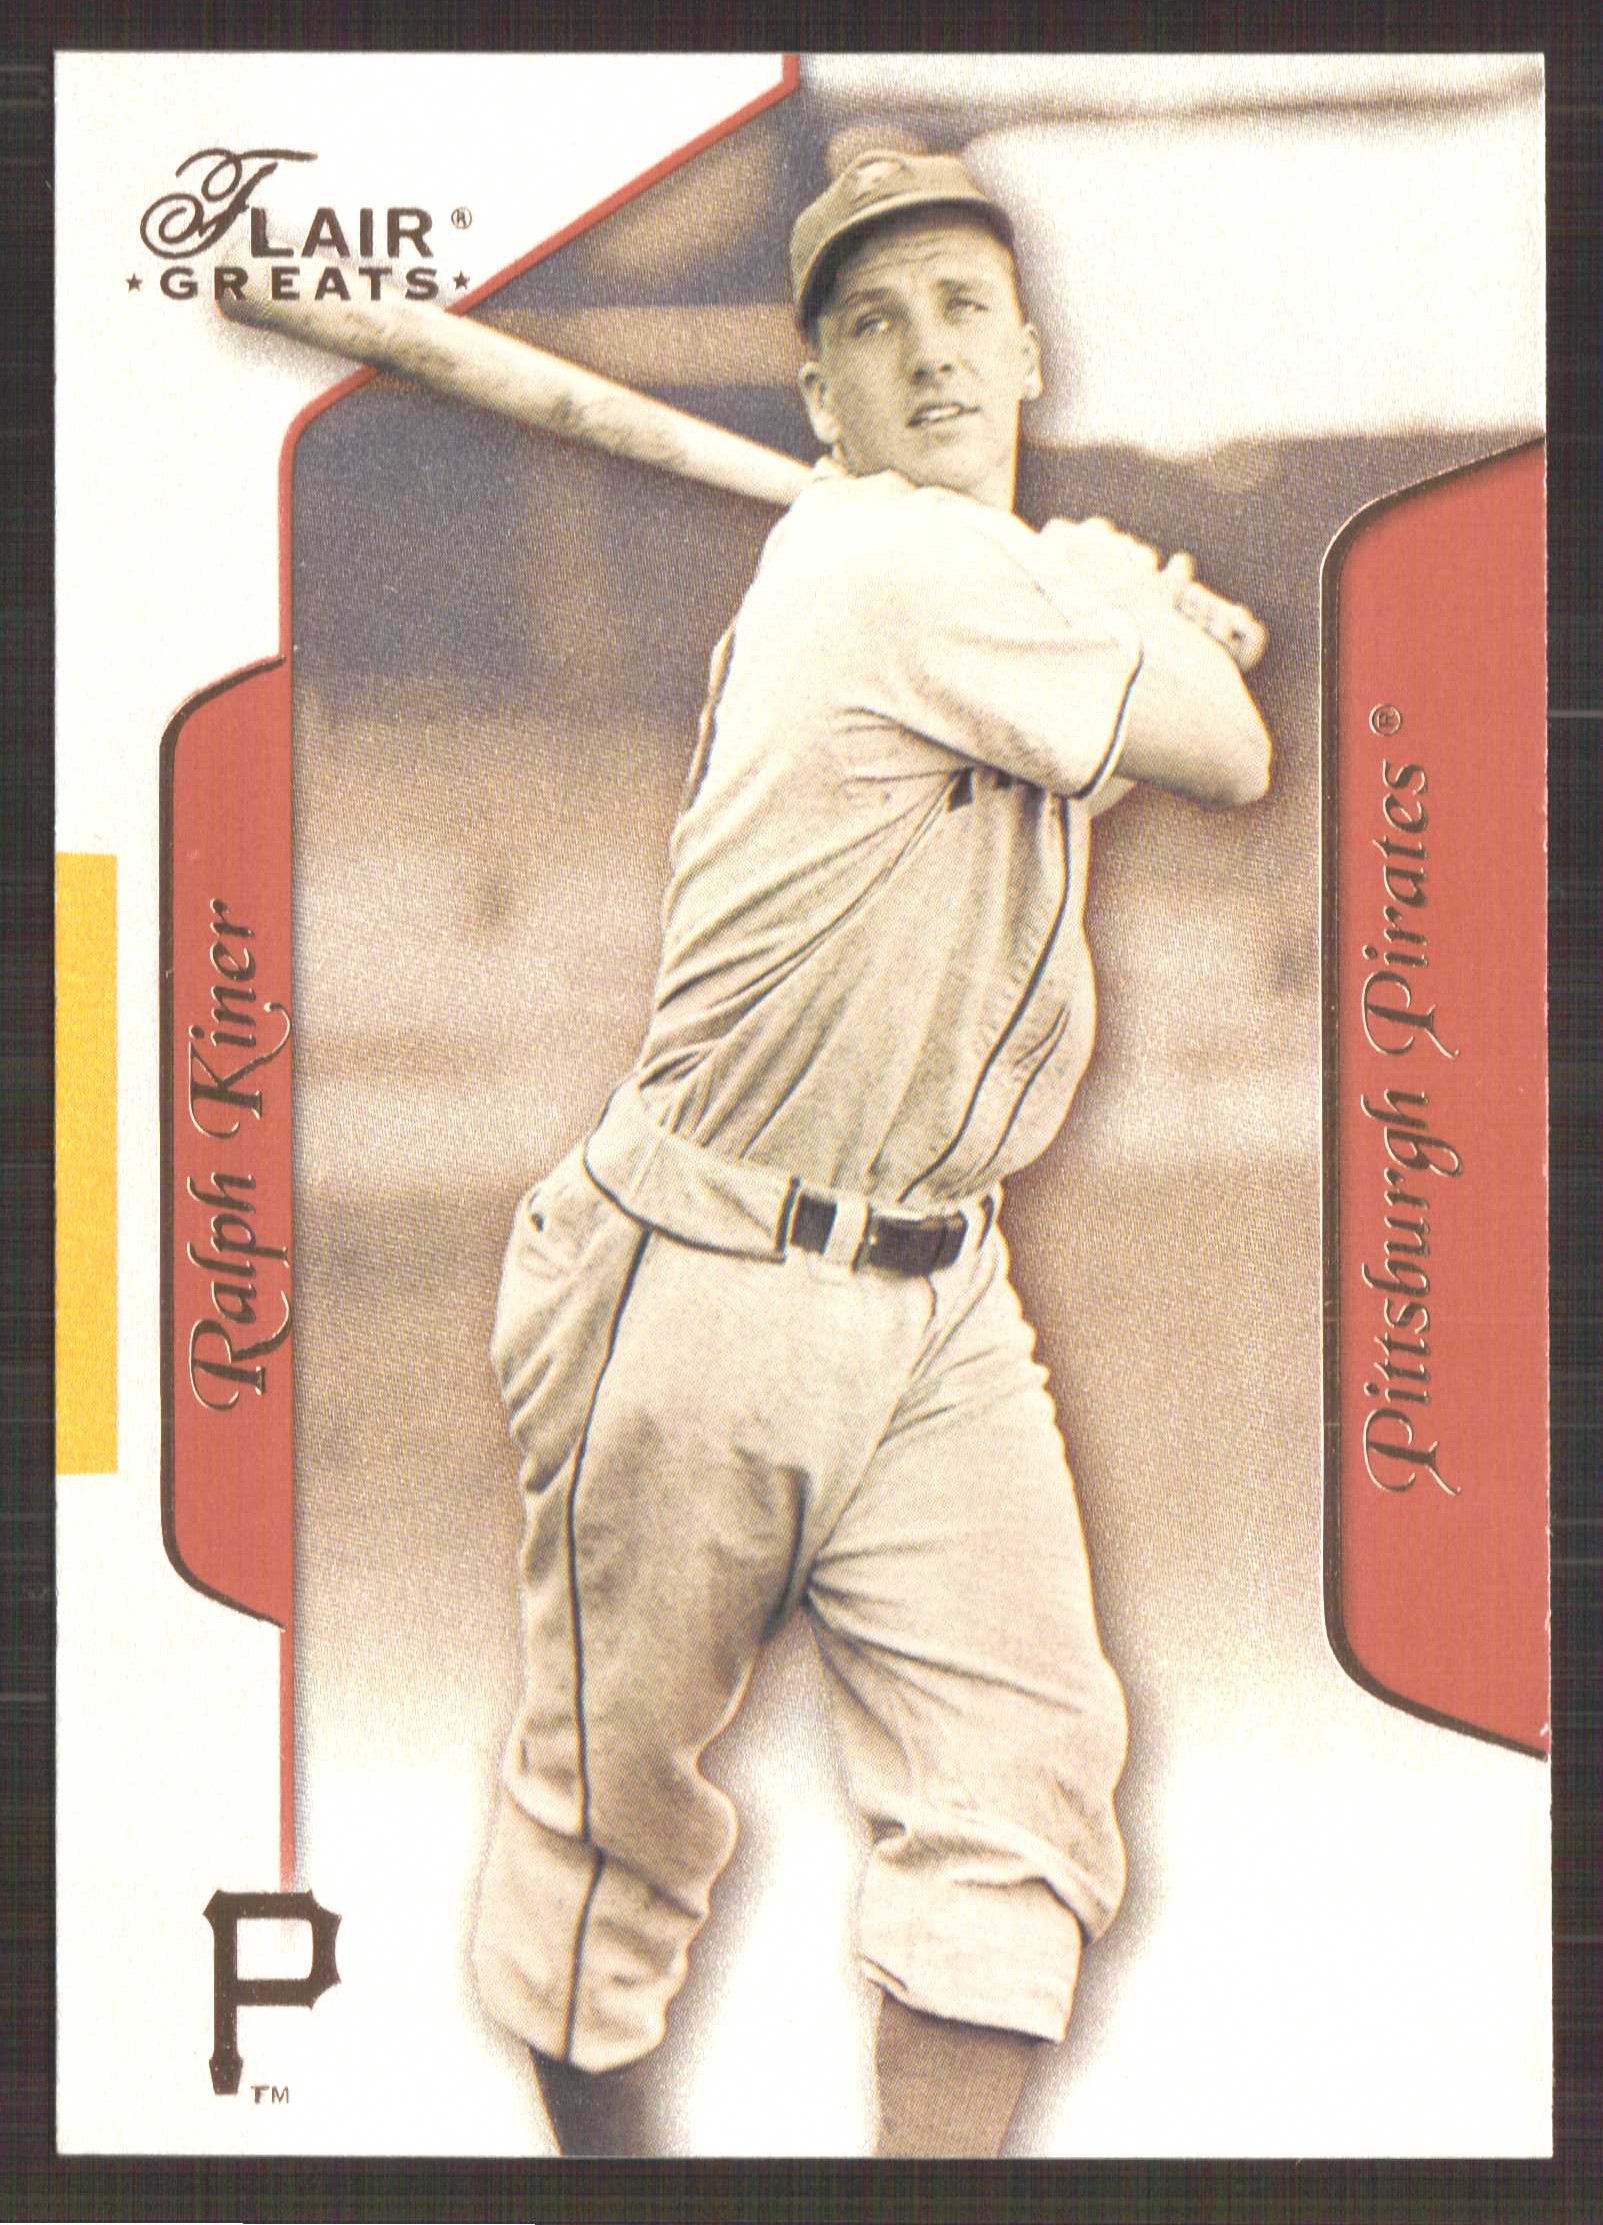 2003 Flair Greats #12 Pee Wee Reese - NM-MT - The Dugout